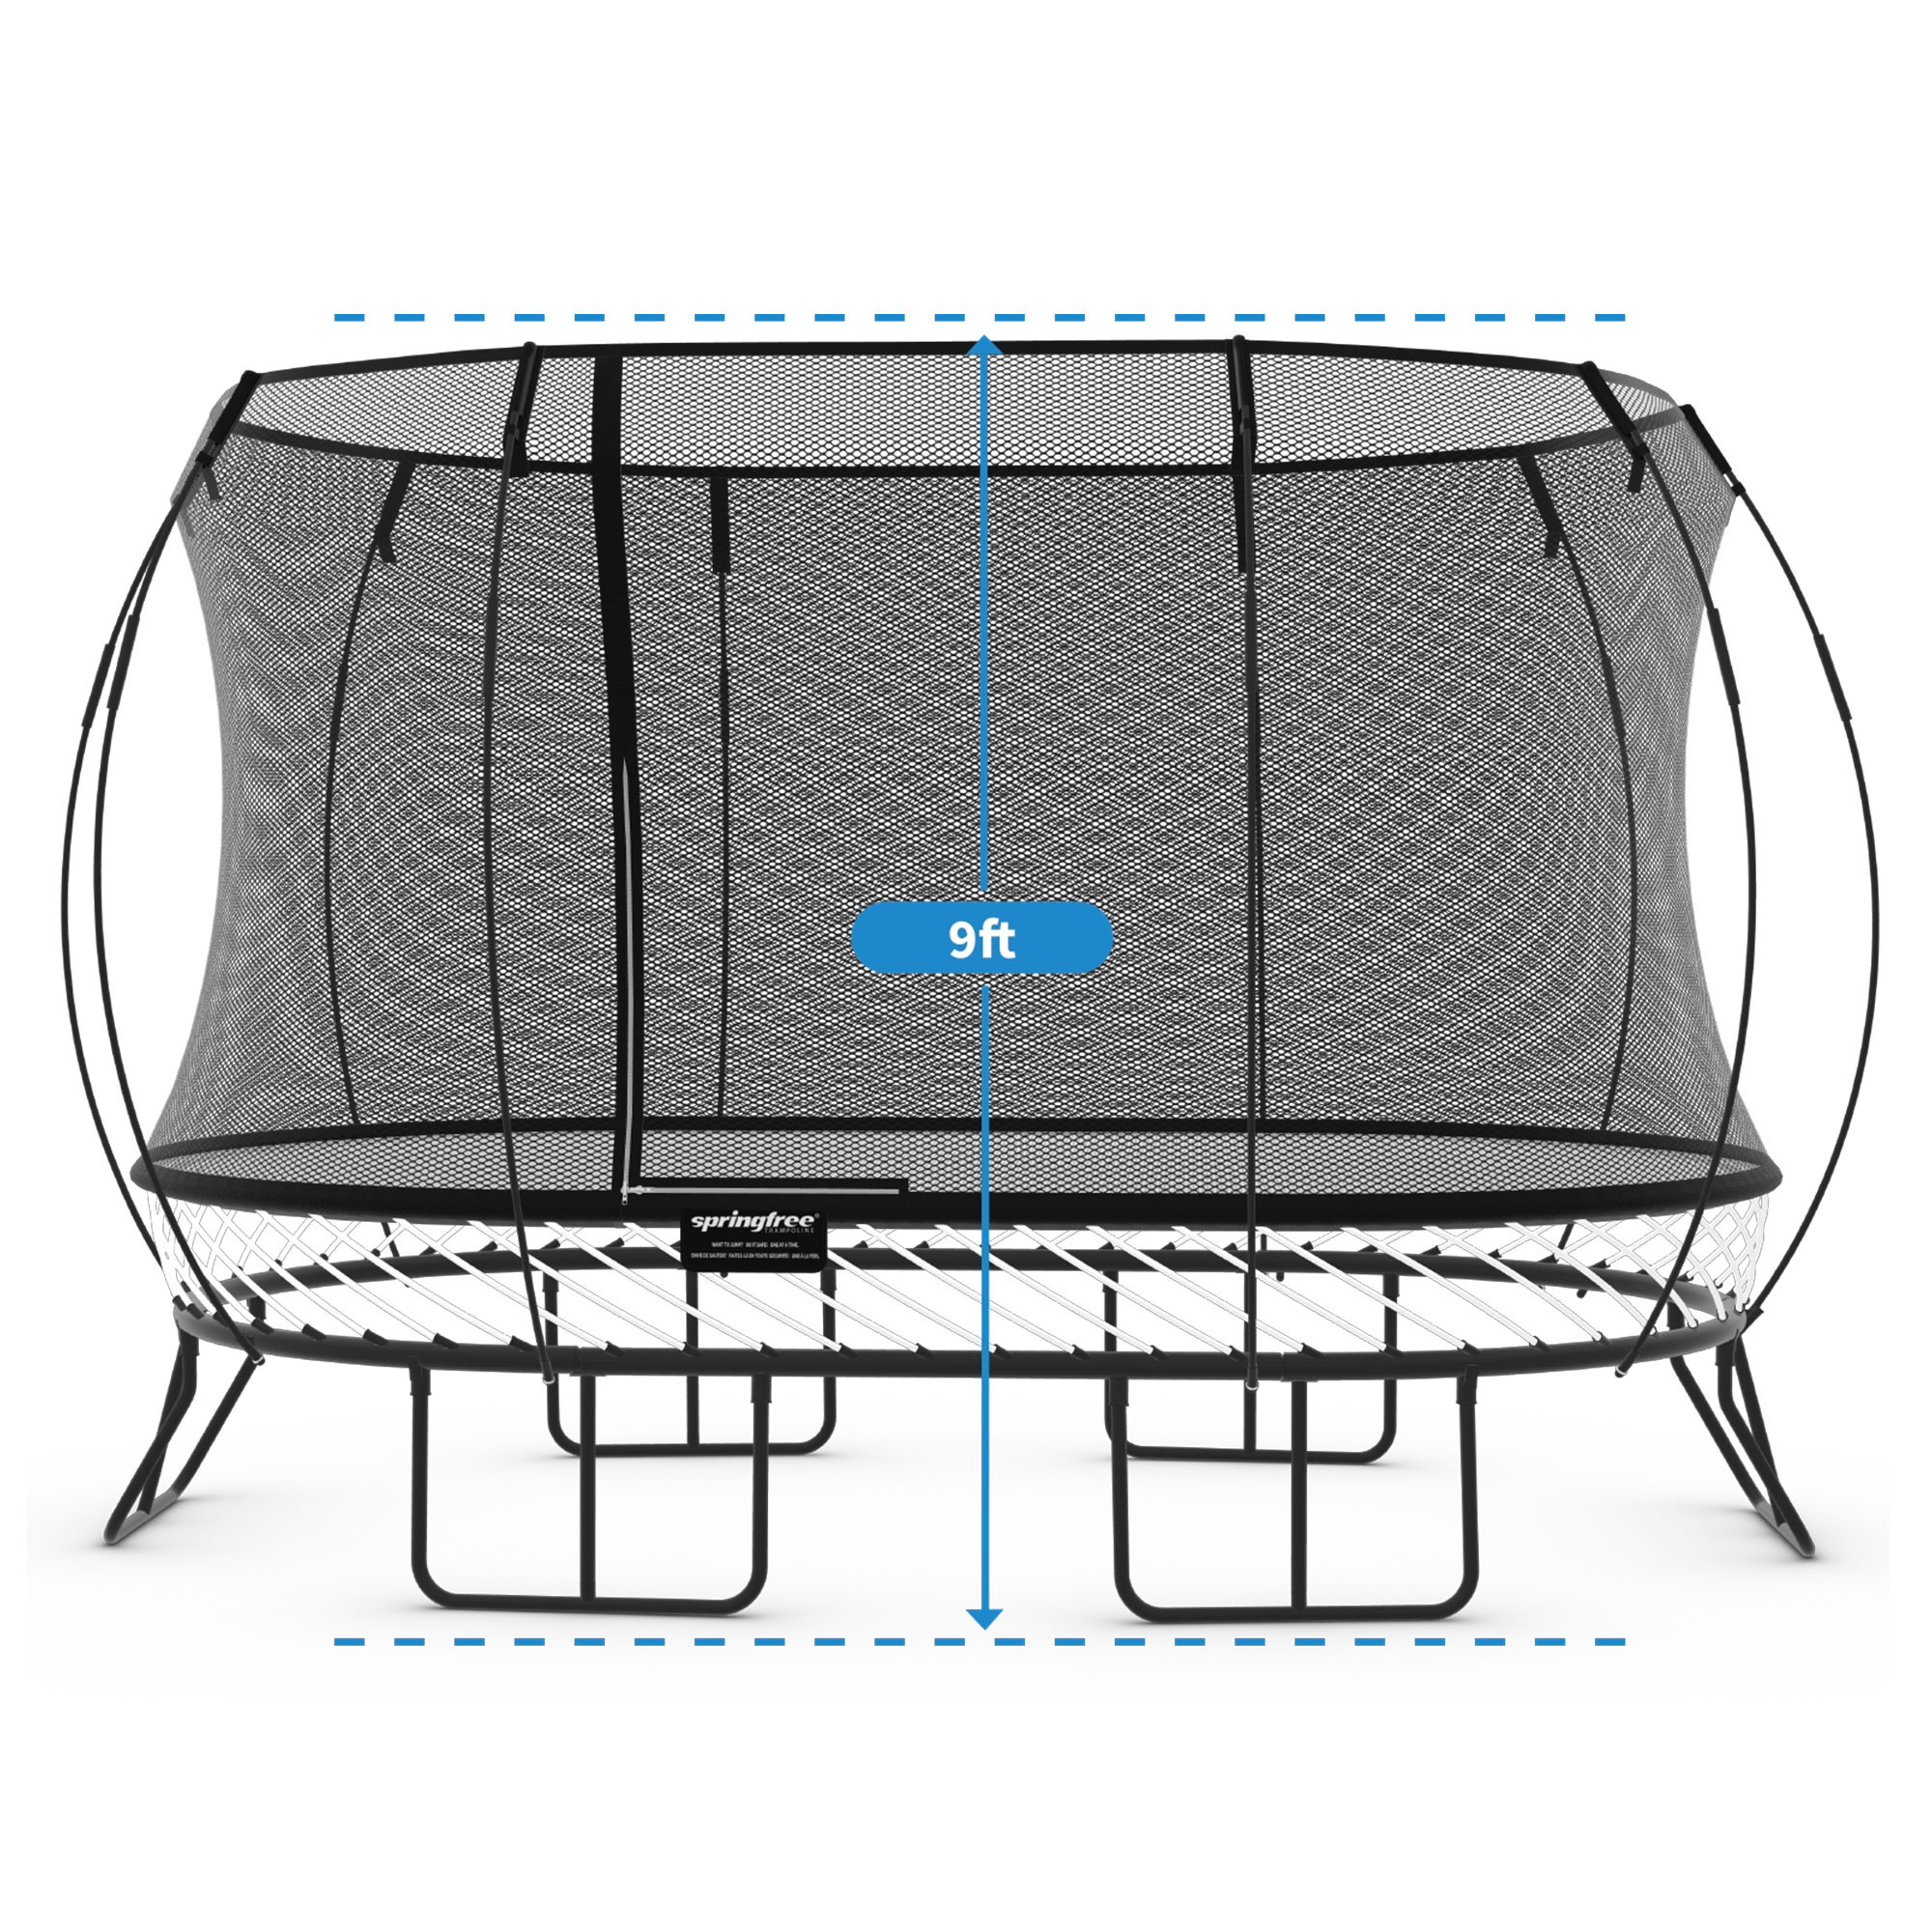 Springfree Outdoor Compact Oval Kids Trampoline for Outdoor Use, Black - image 5 of 9